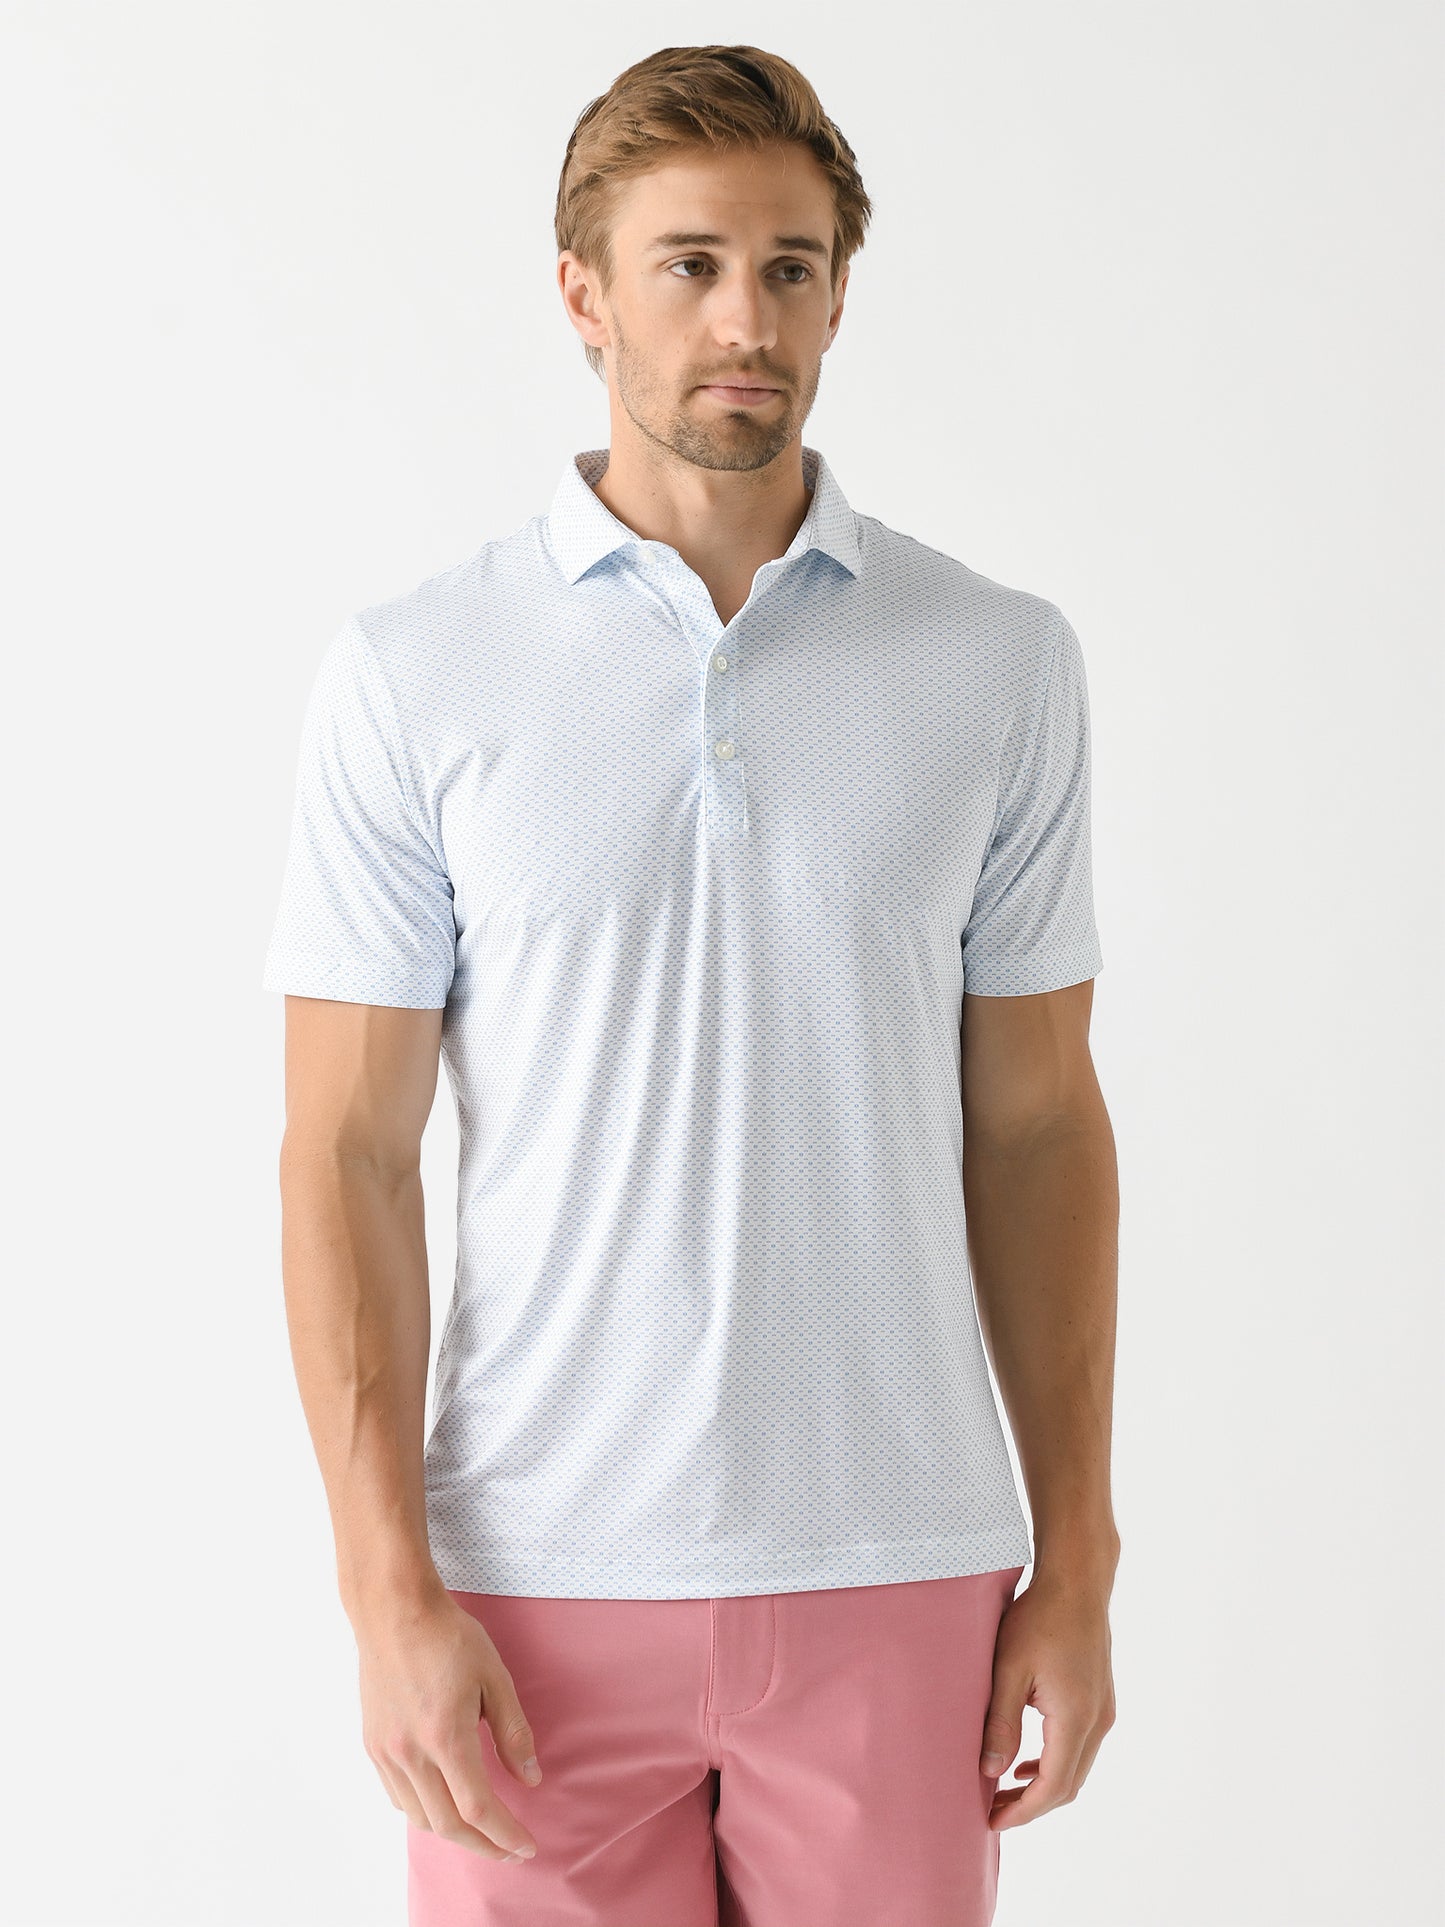 Johnnie-O Men's Kelso Printed Featherweight Performance Polo